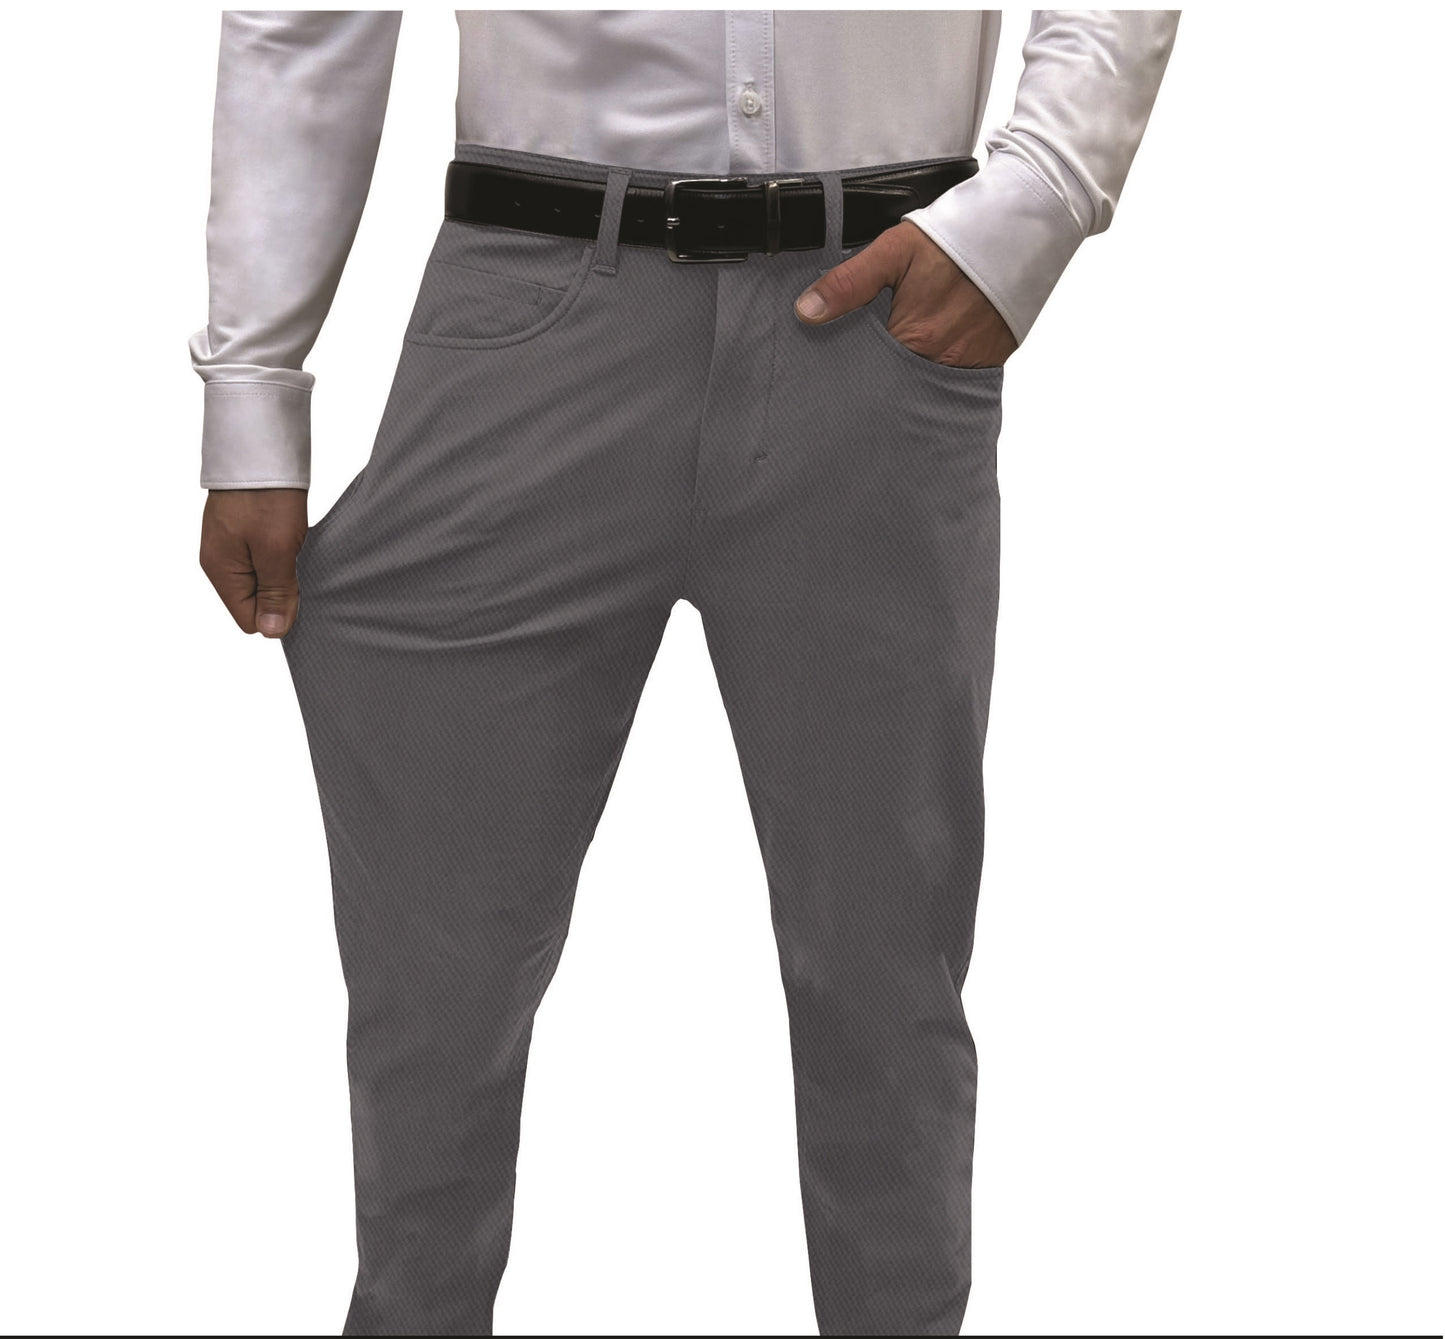 LT Grey Tech Flex Pants Don'tCrushYourNuts The Perfect Office And Leisure Pant!